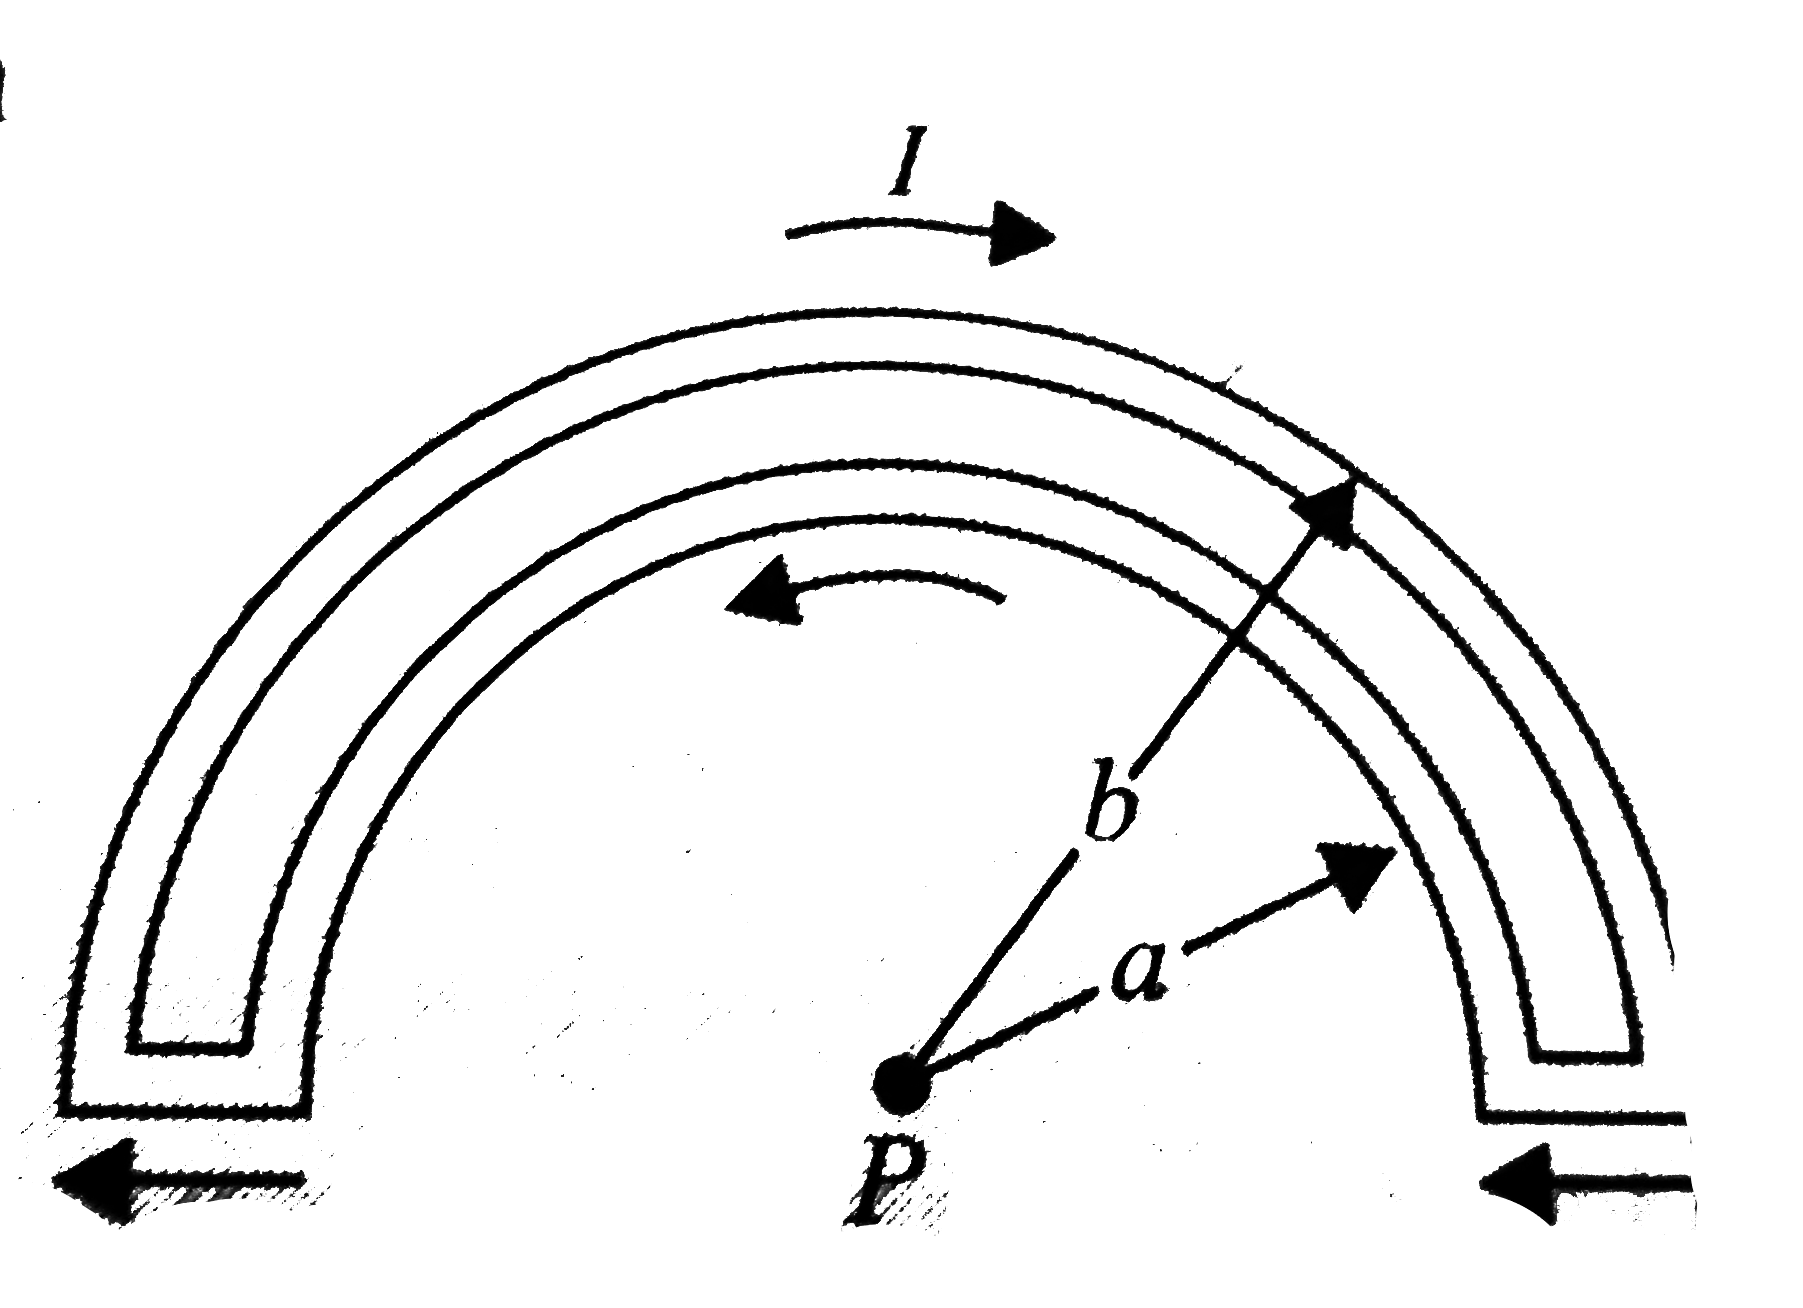 Two semicircles shown in Fig. have radii a and b. Calculate the net magnetic field (magnitude and direction) that the current in the wires produces at point P.